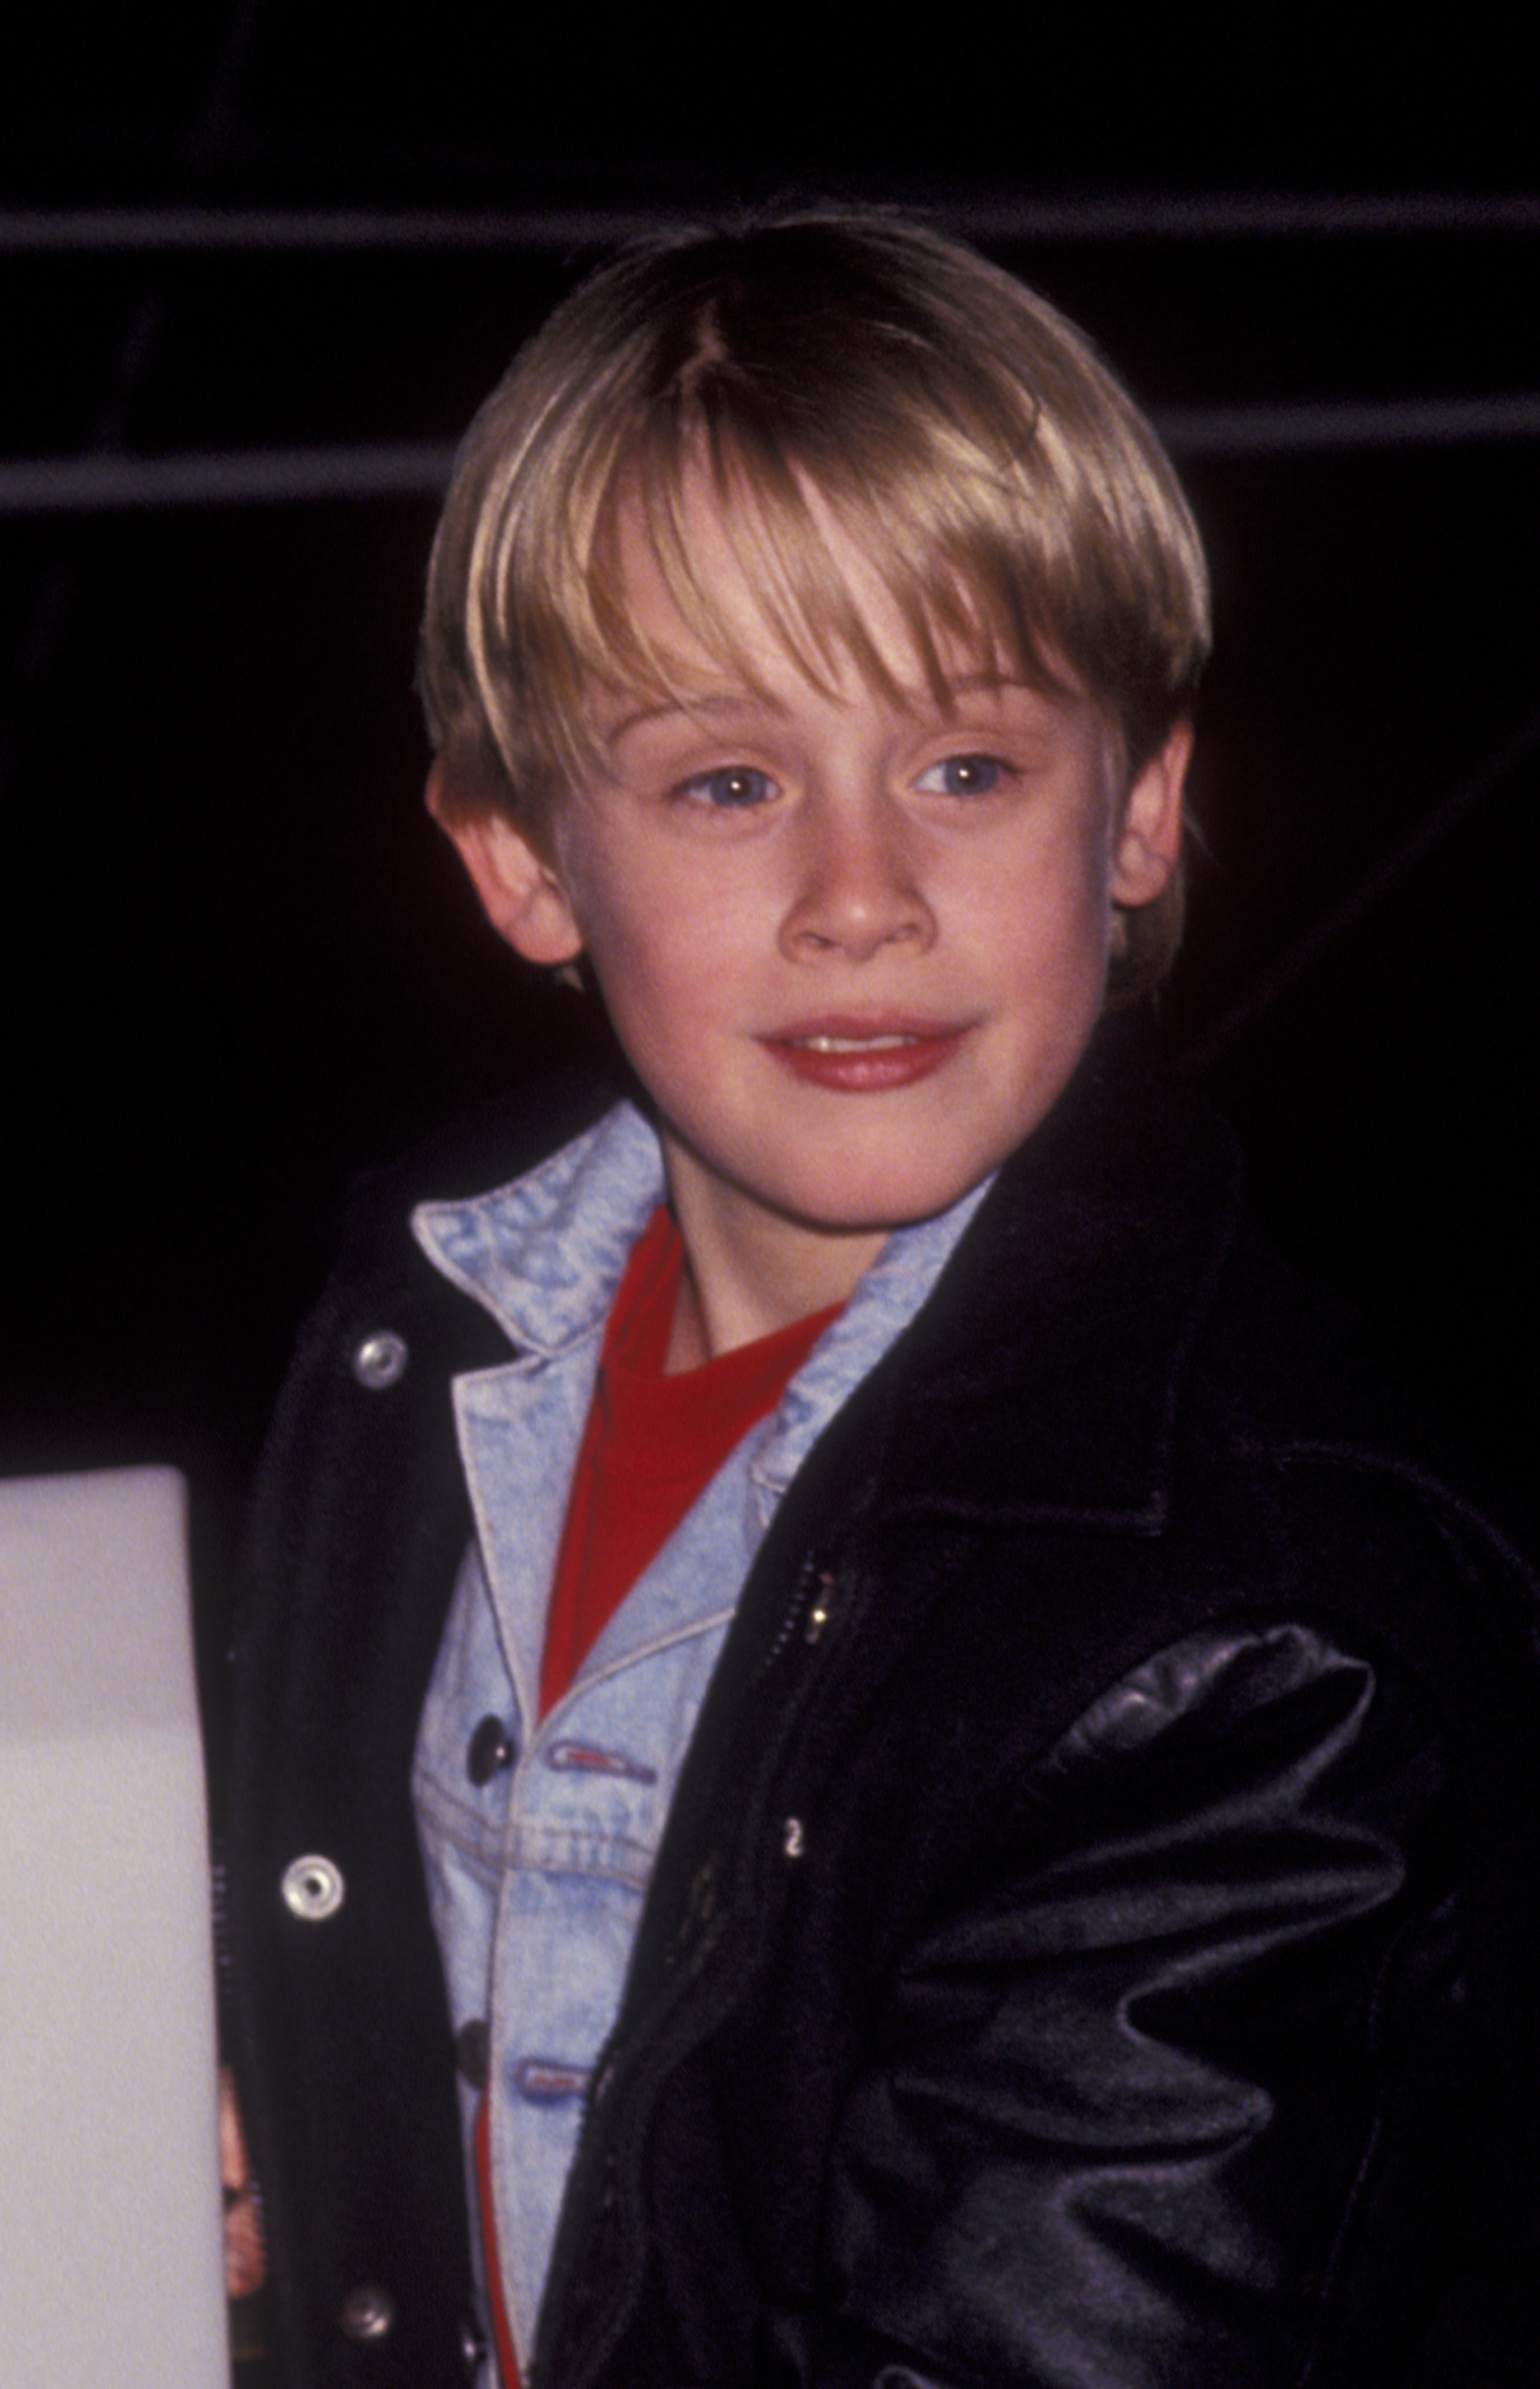 Macaulay Culkin attends Light Up A Life Benefit for Children's EMS Foundation on November 13, 1991 at FAO Scharz Toy Store in New York City. |  Source: Getty Images